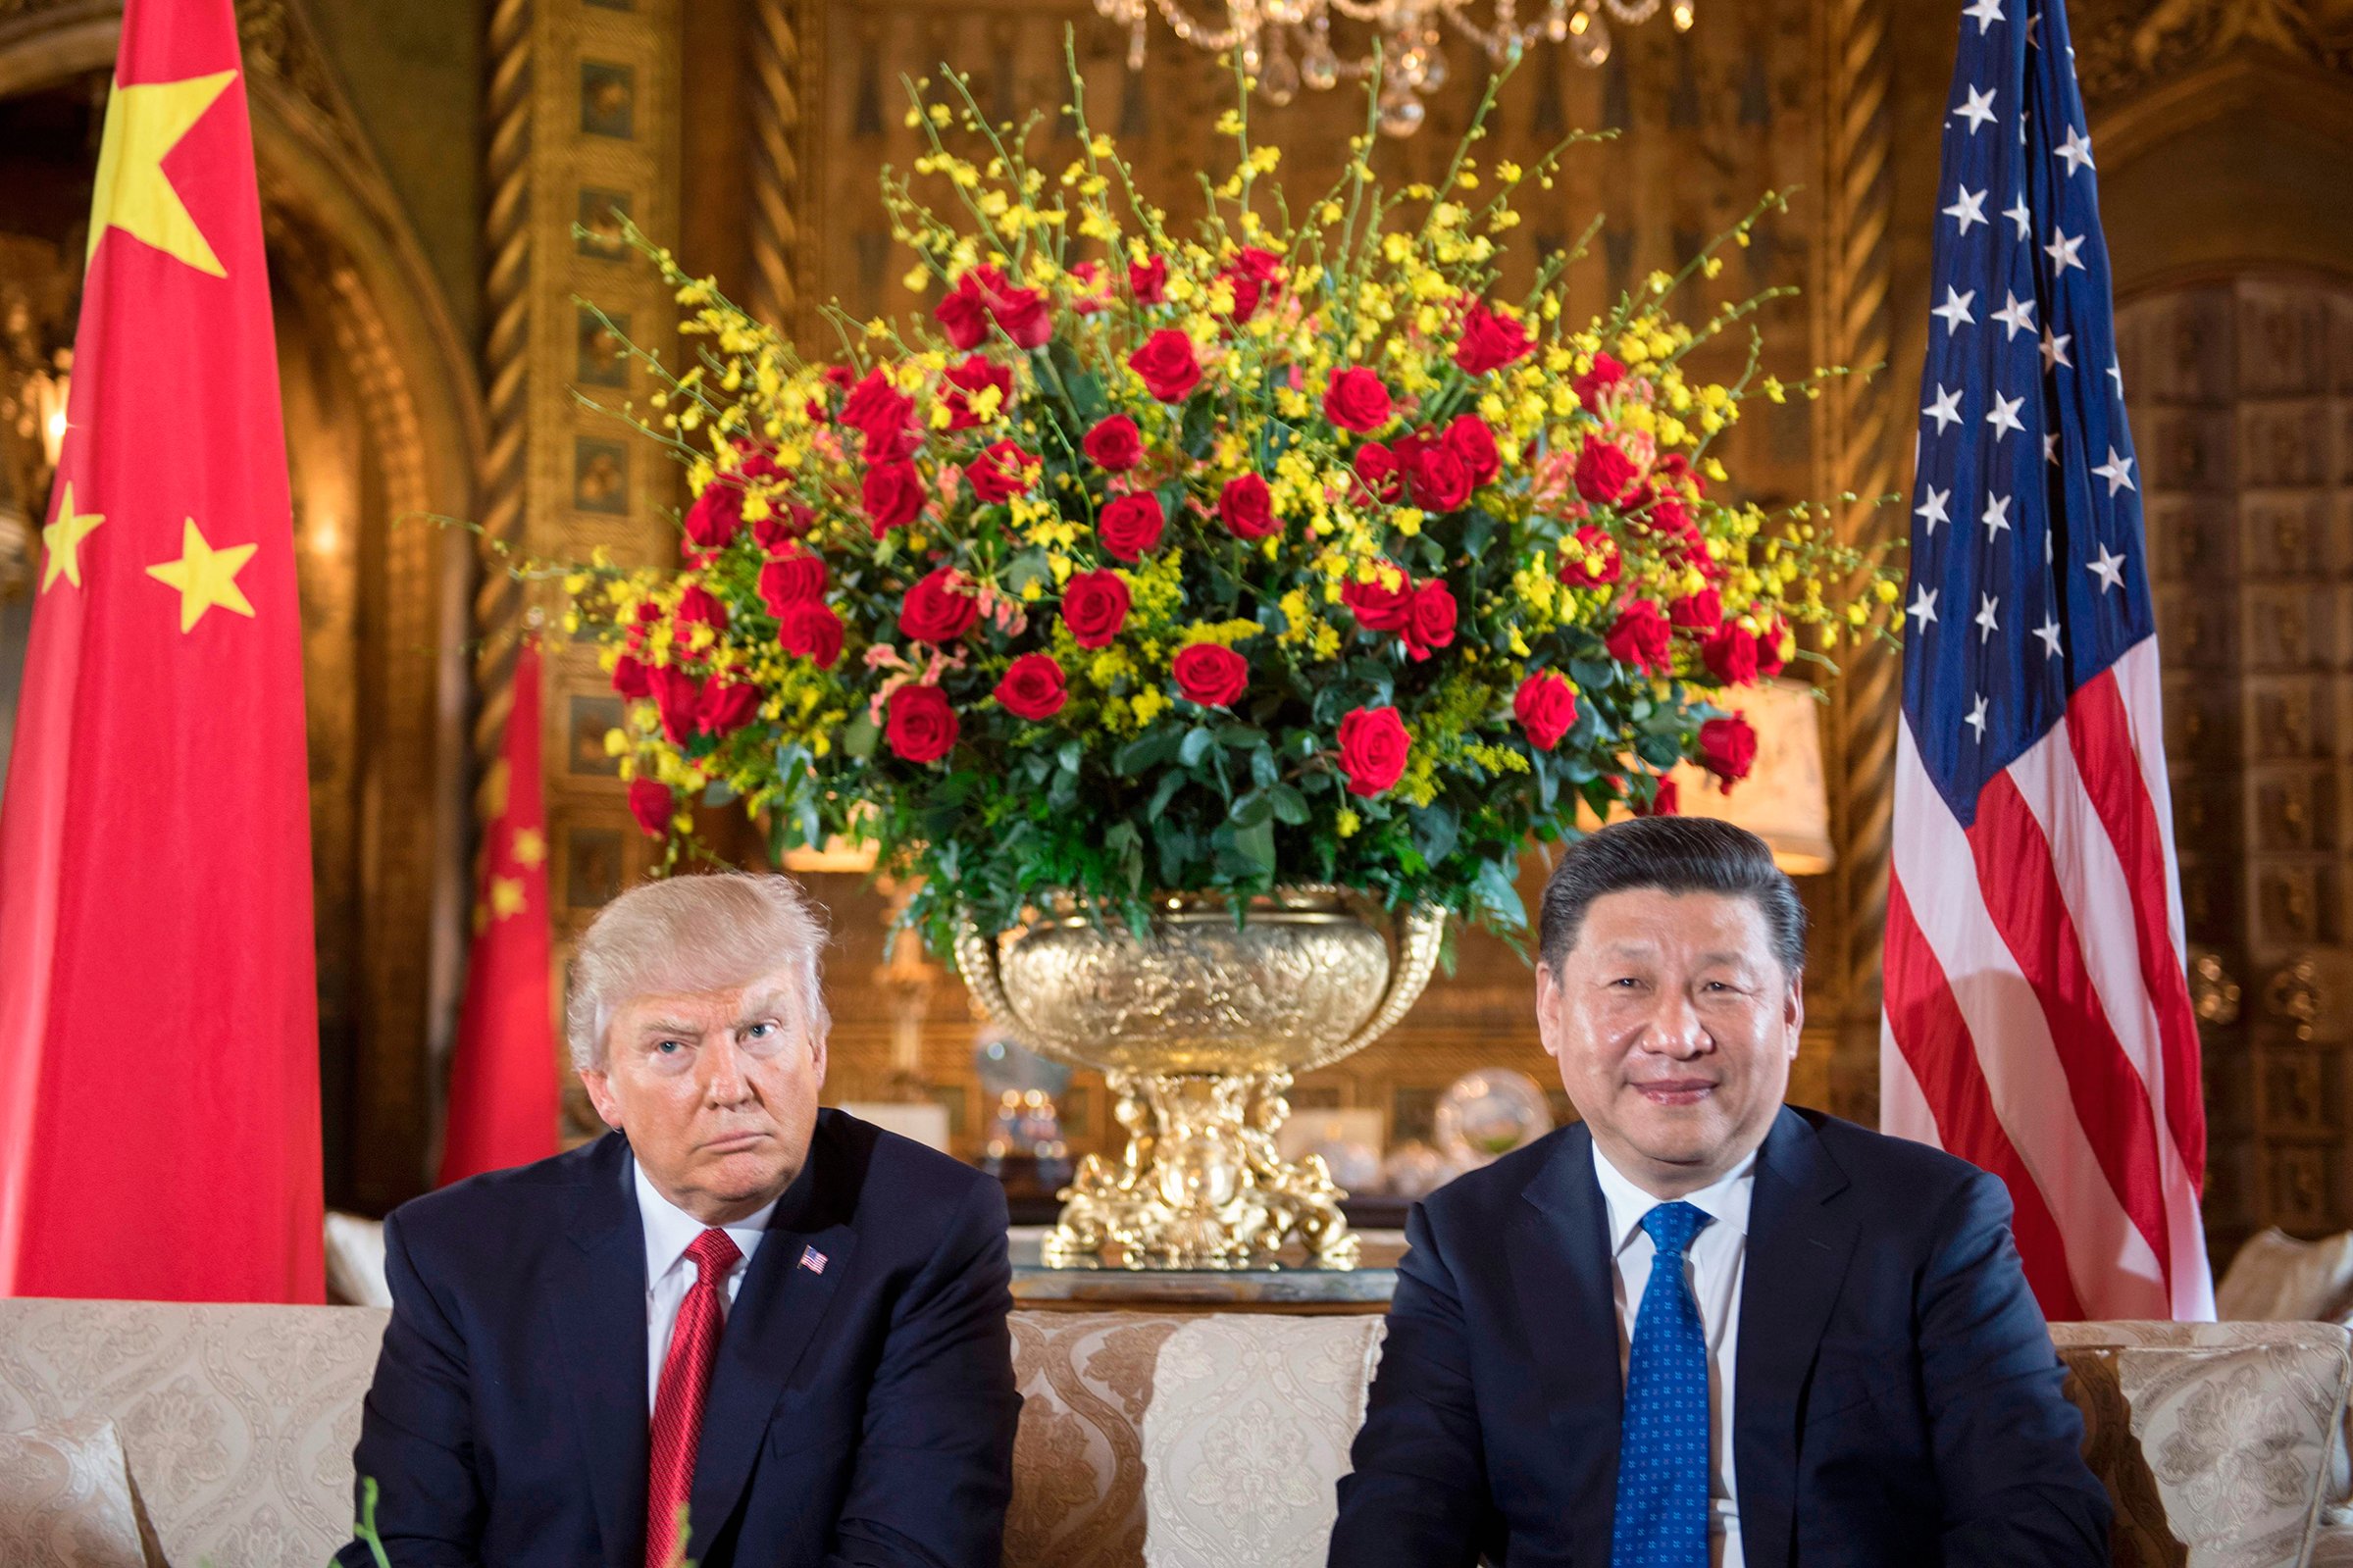 Global side-eye: Trump and Xi’s relationship has grown more tense since meeting at Mar-a-Lago earlier this year